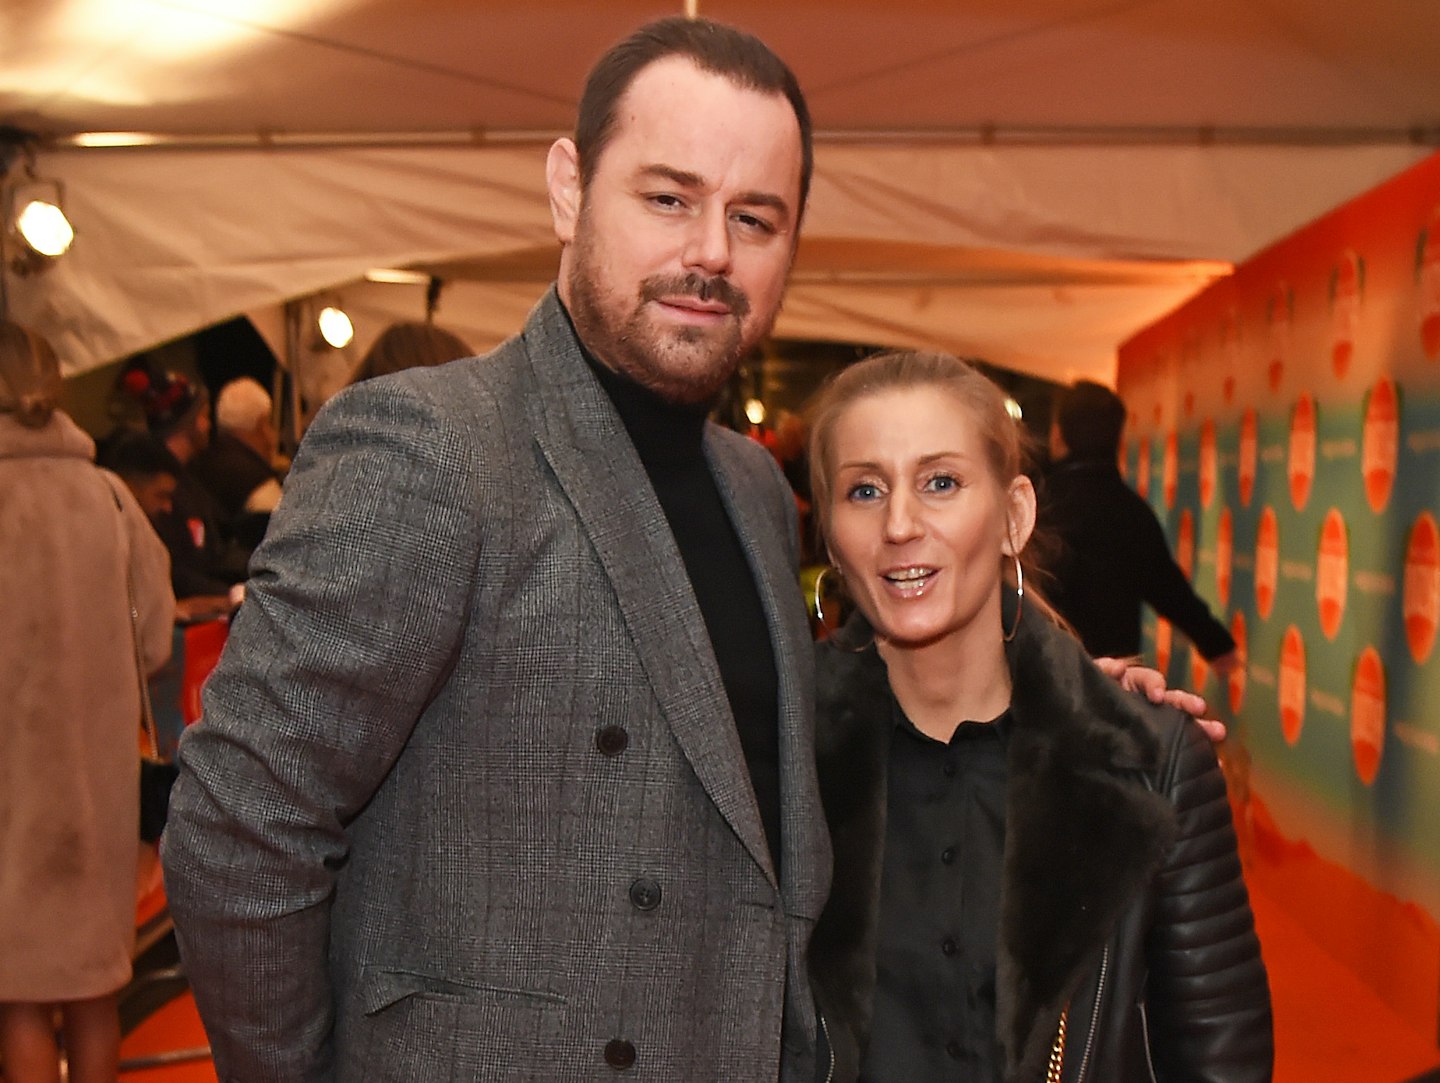 Danny Dyer and wife Joanne Mas